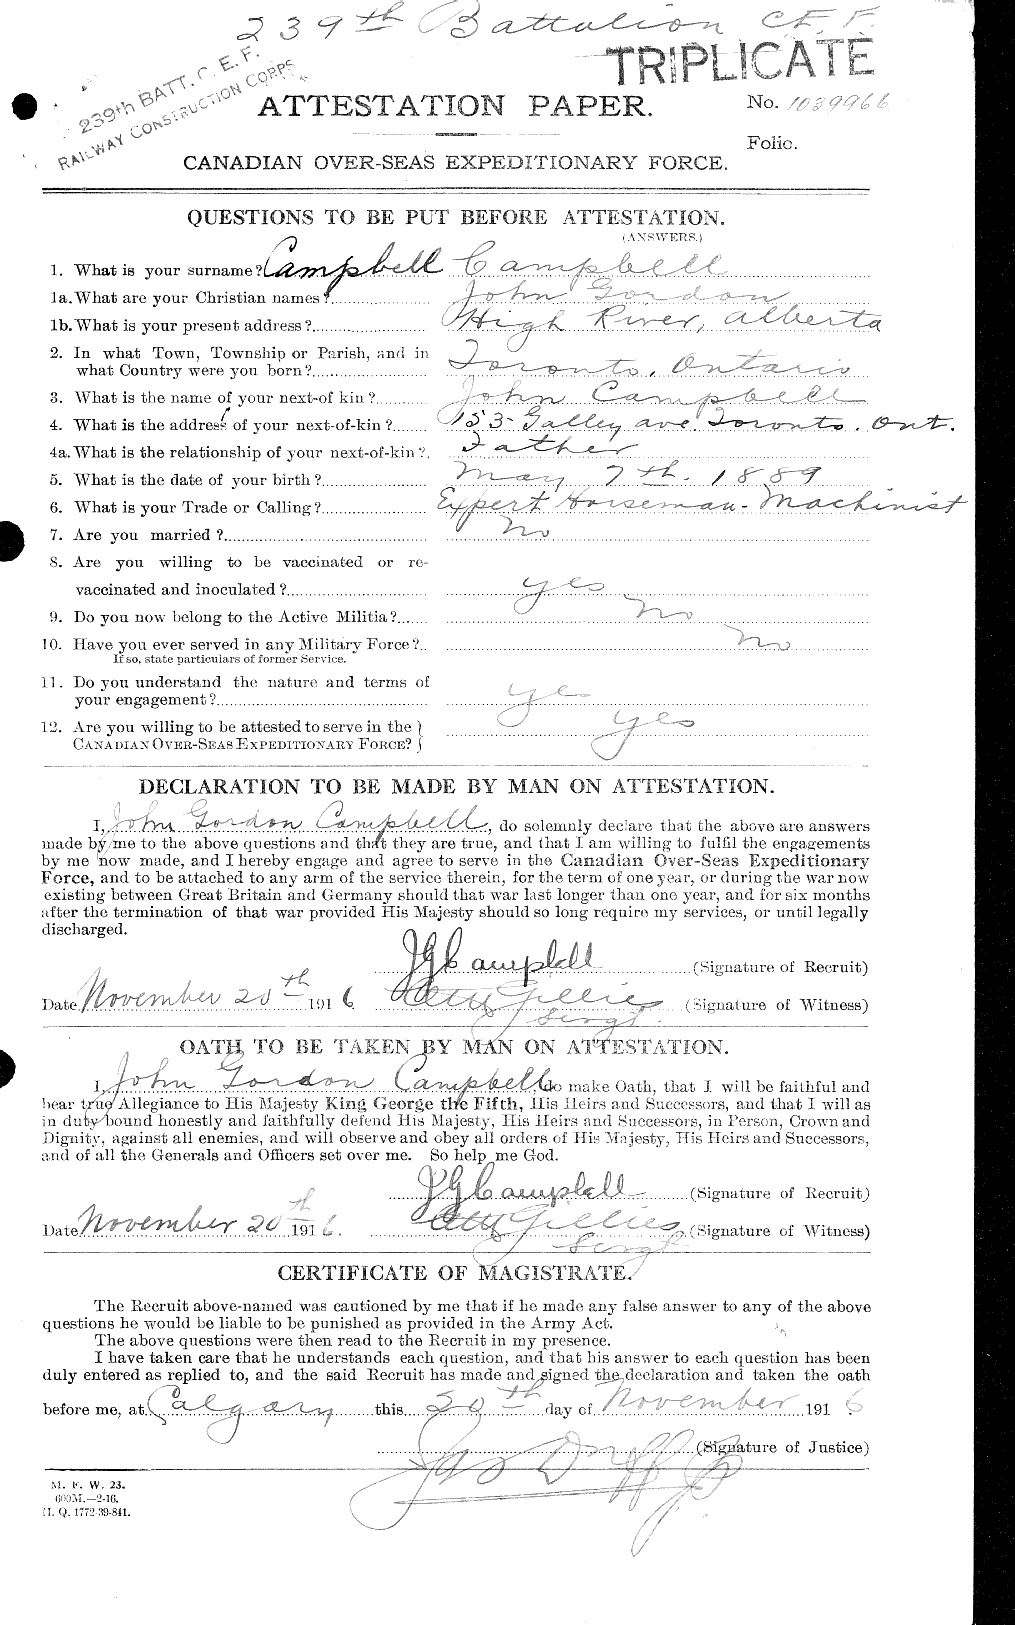 Personnel Records of the First World War - CEF 008529a